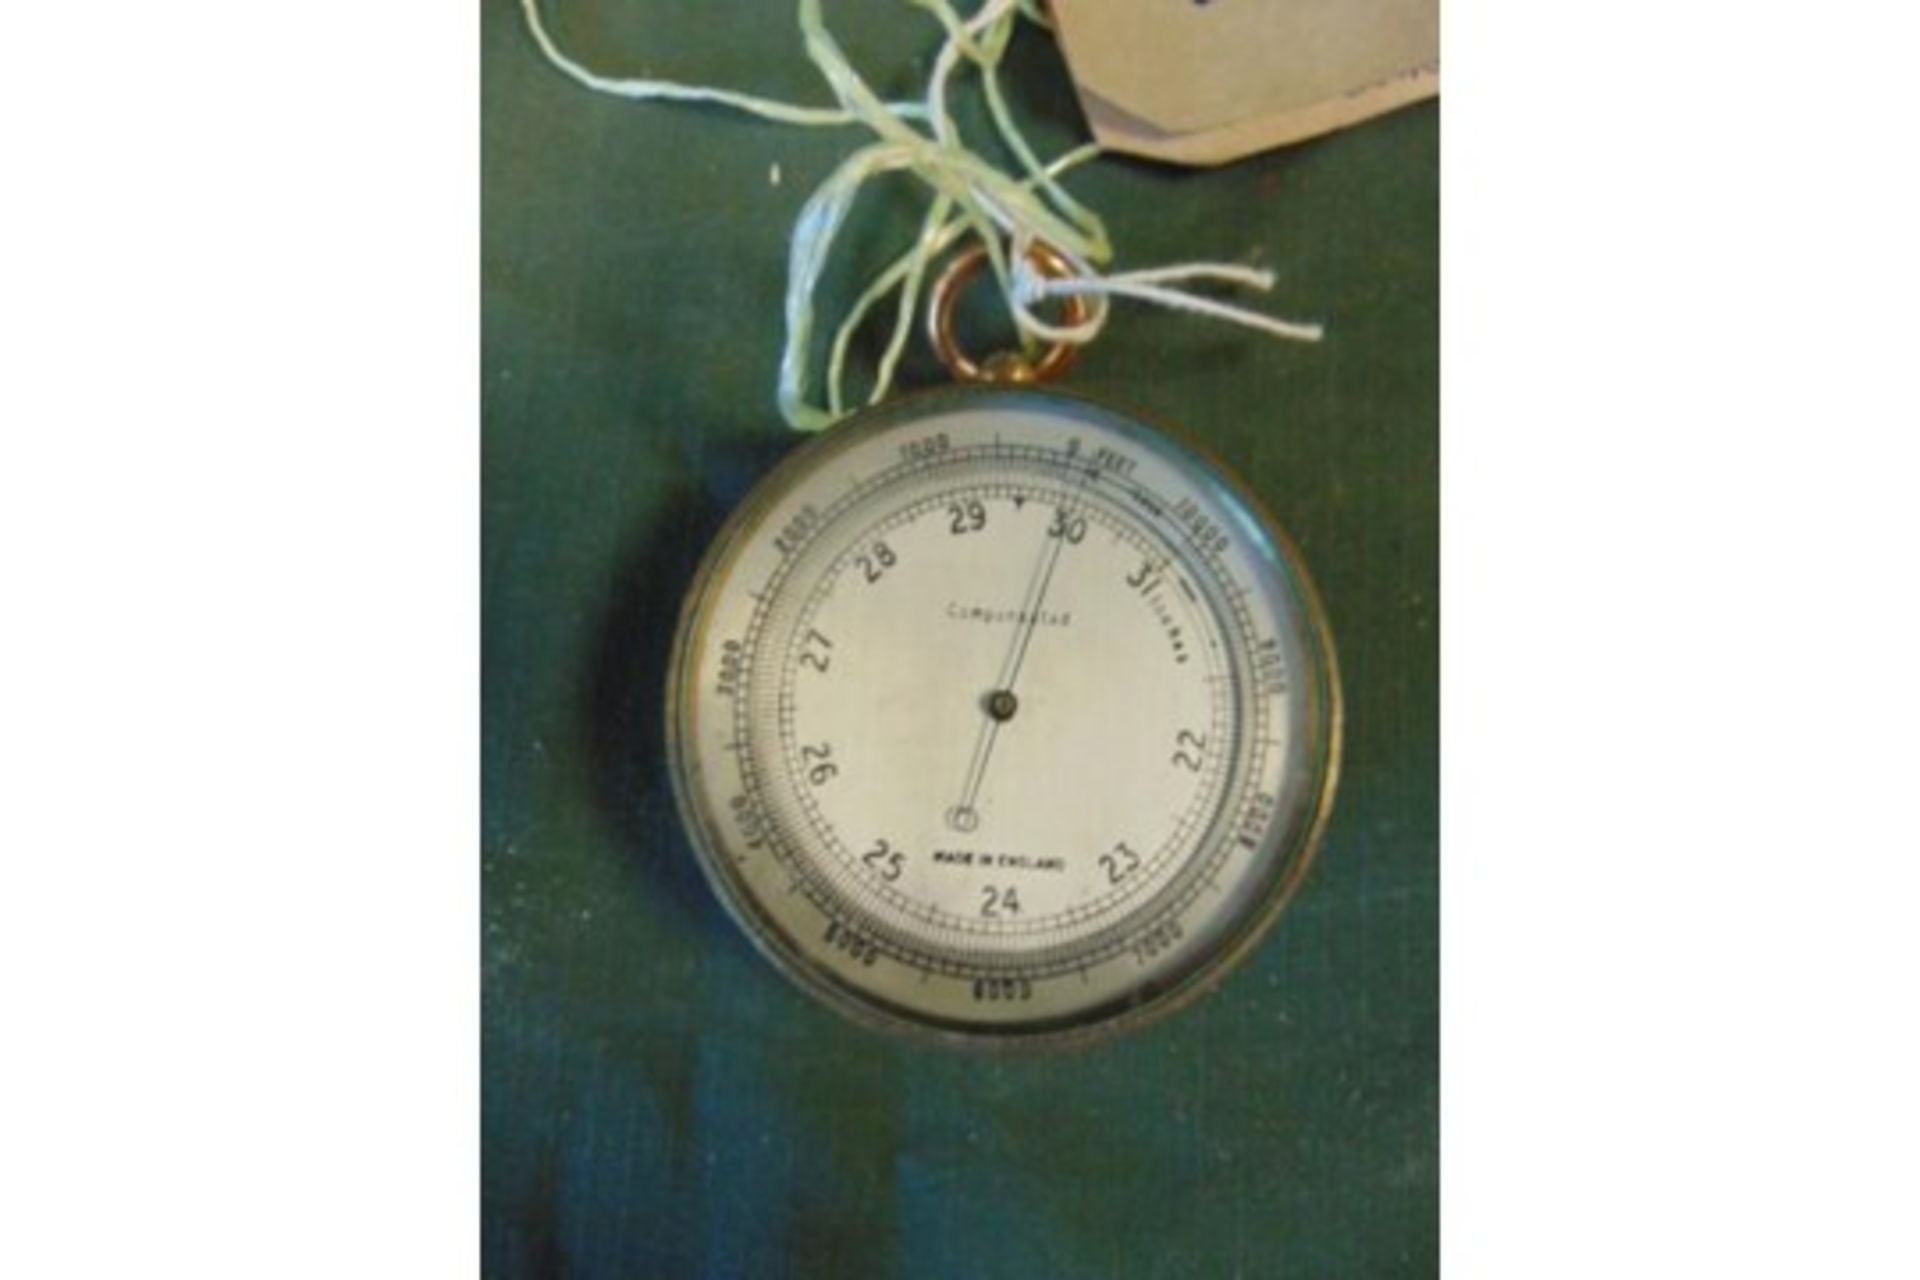 Military Issue Aneroid Barometer graduated in feet & millibars